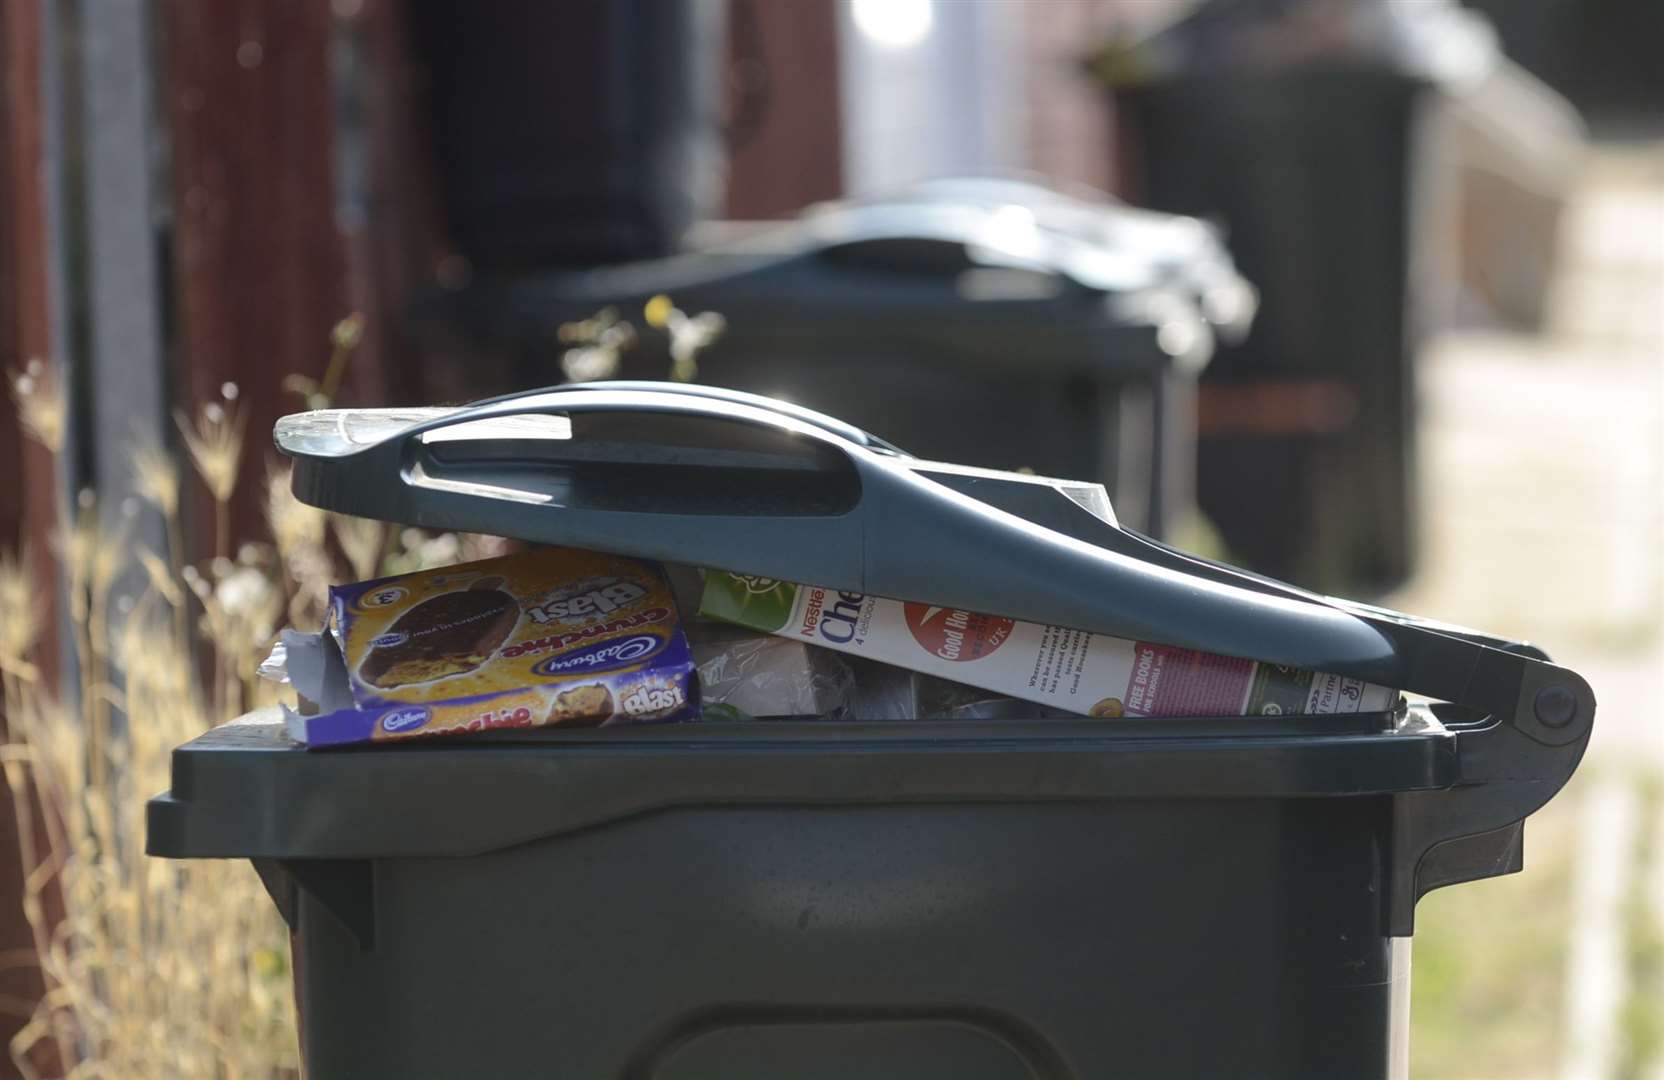 Bin collection times are being extended in Ashford